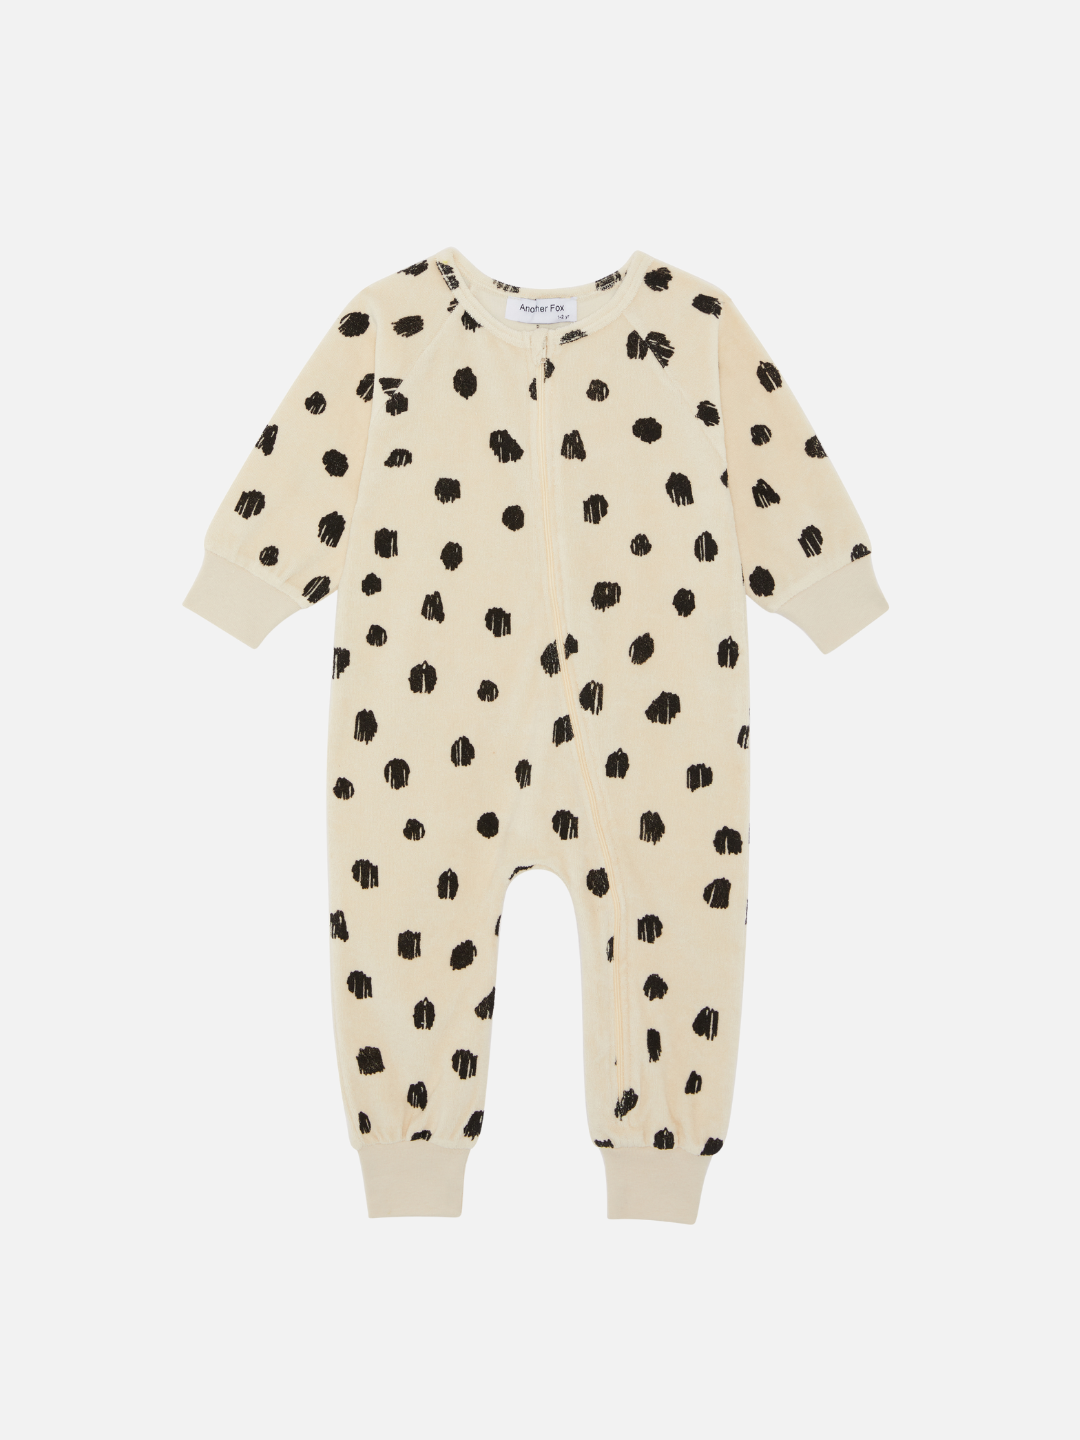 Front view of the baby Cheetah Terry Towel Sleepsuit featuring a zipper. Black cheetah spots on ivory background.